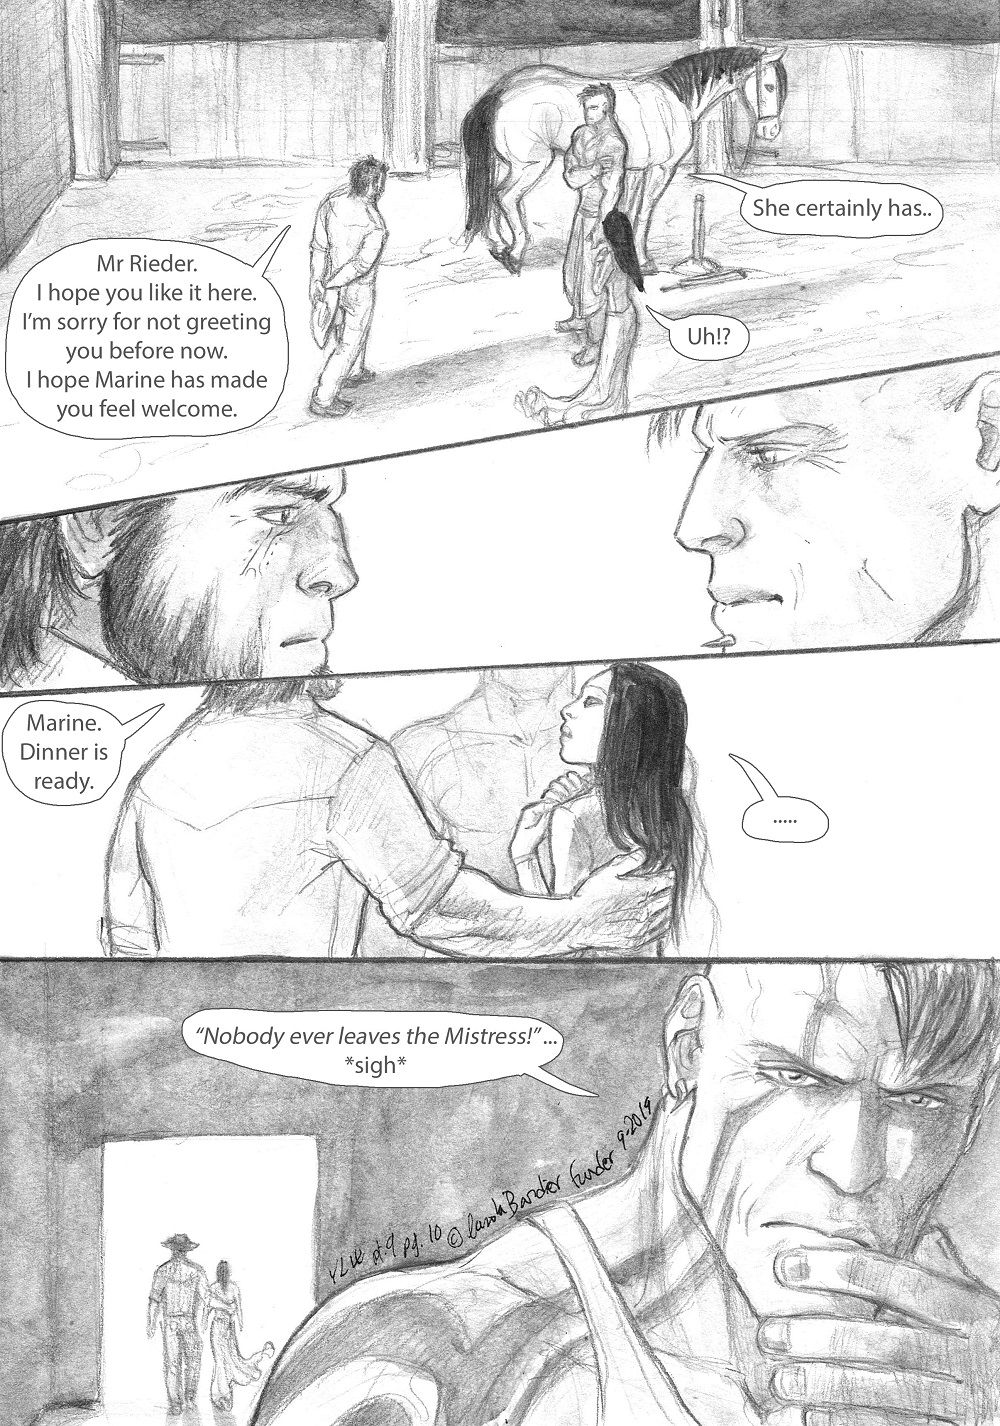 YLW_part9_A_Convenient_Coincidence_page10